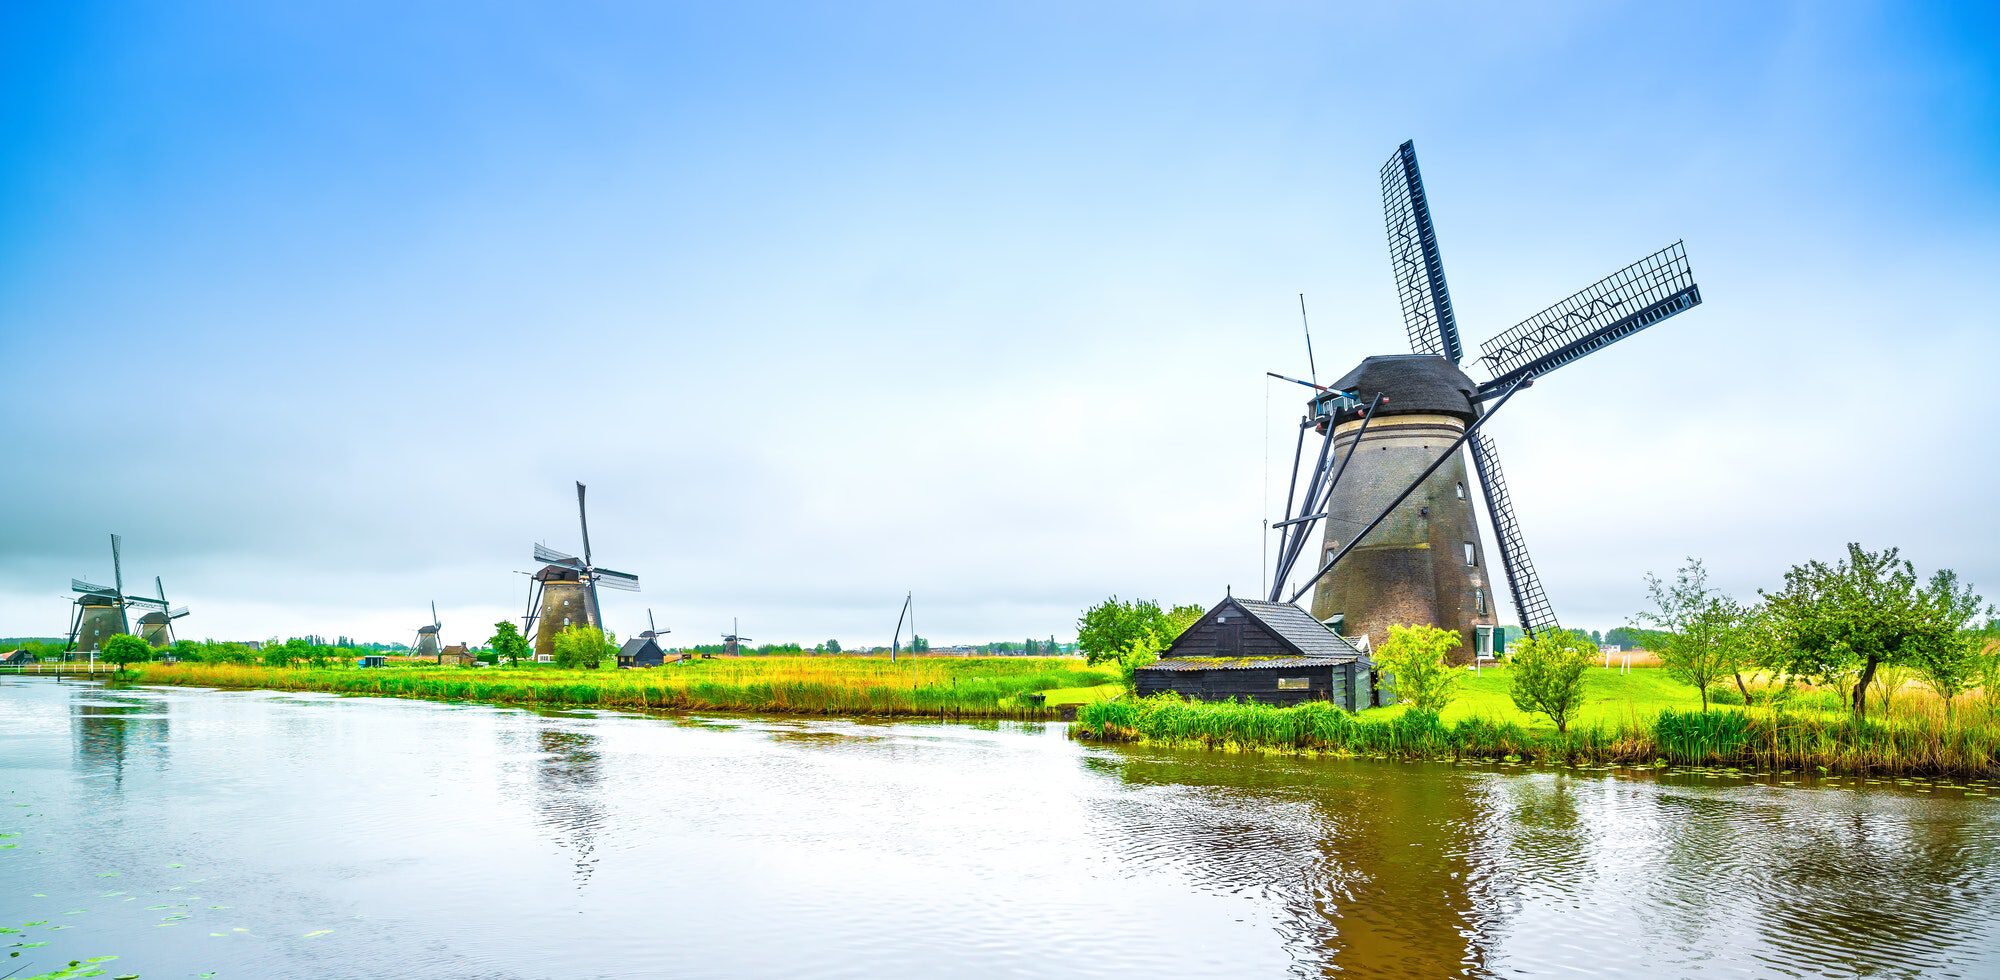 Windmills and canal in Kinderdijk, Holland or Netherlands. Unesco site